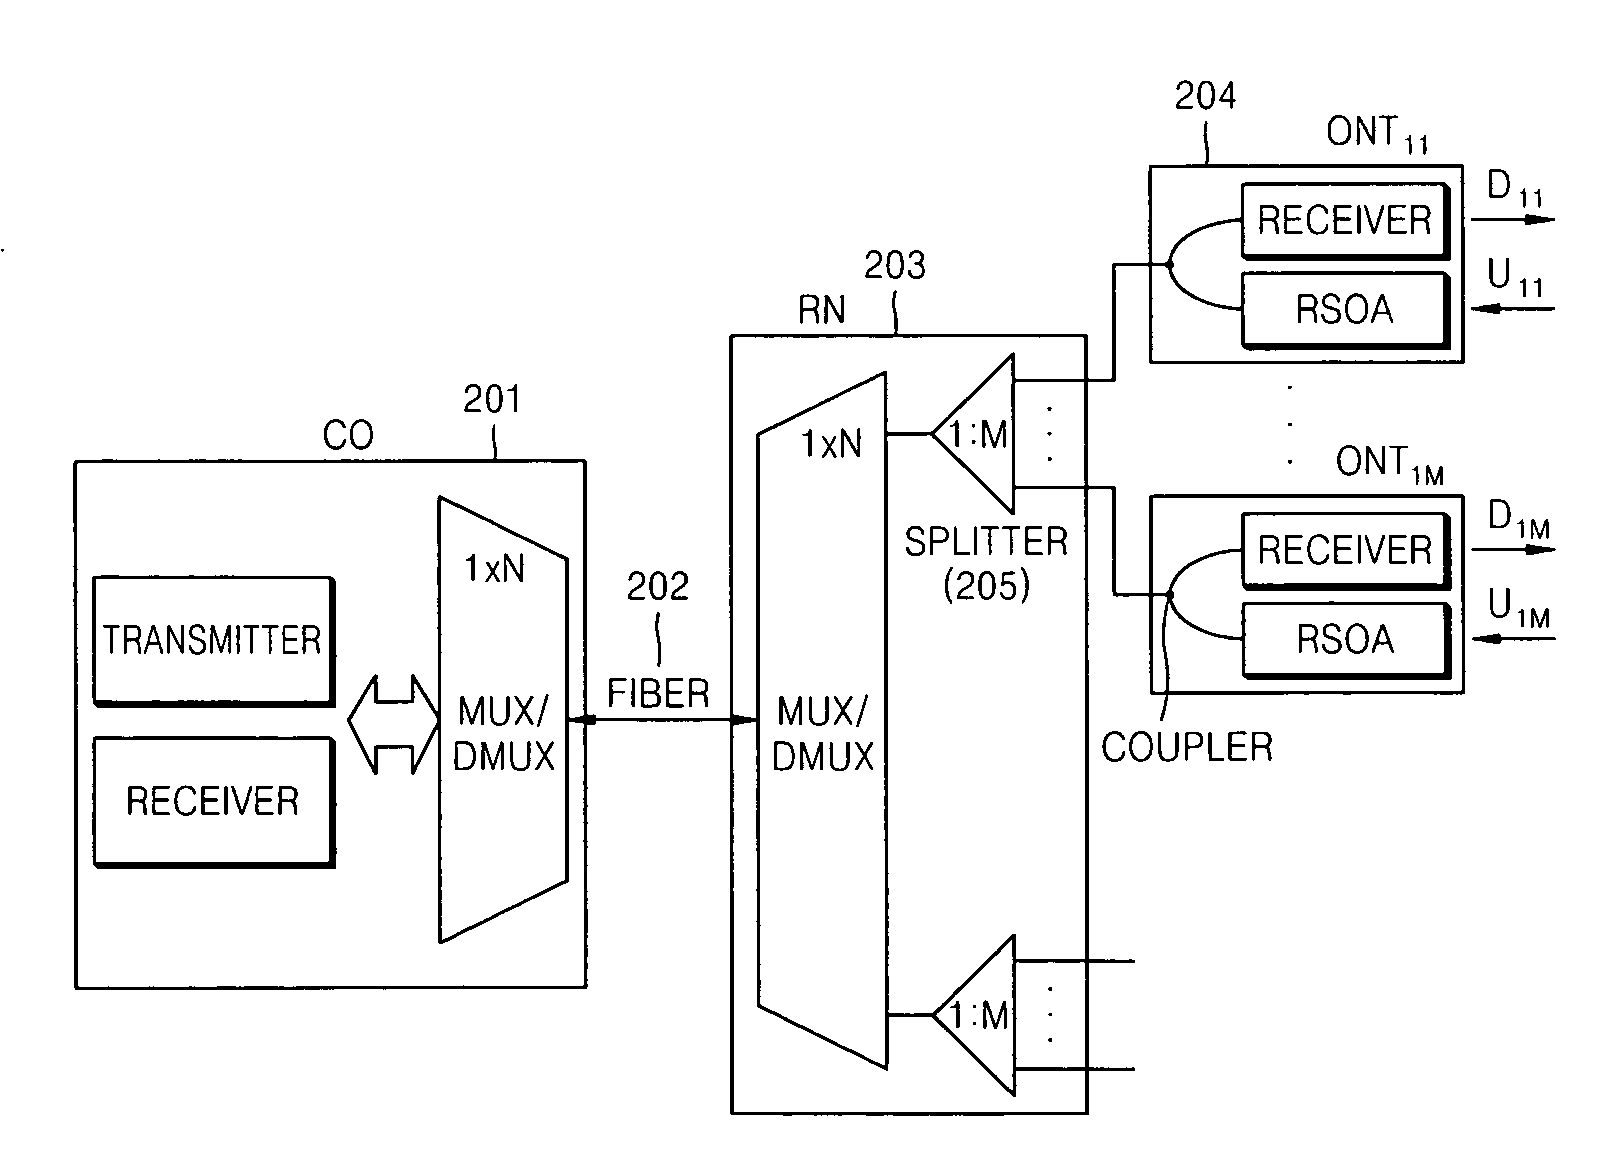 Feed-forward current injection circuits and semiconductor optical amplifier structures for downstream optical signal reuse method